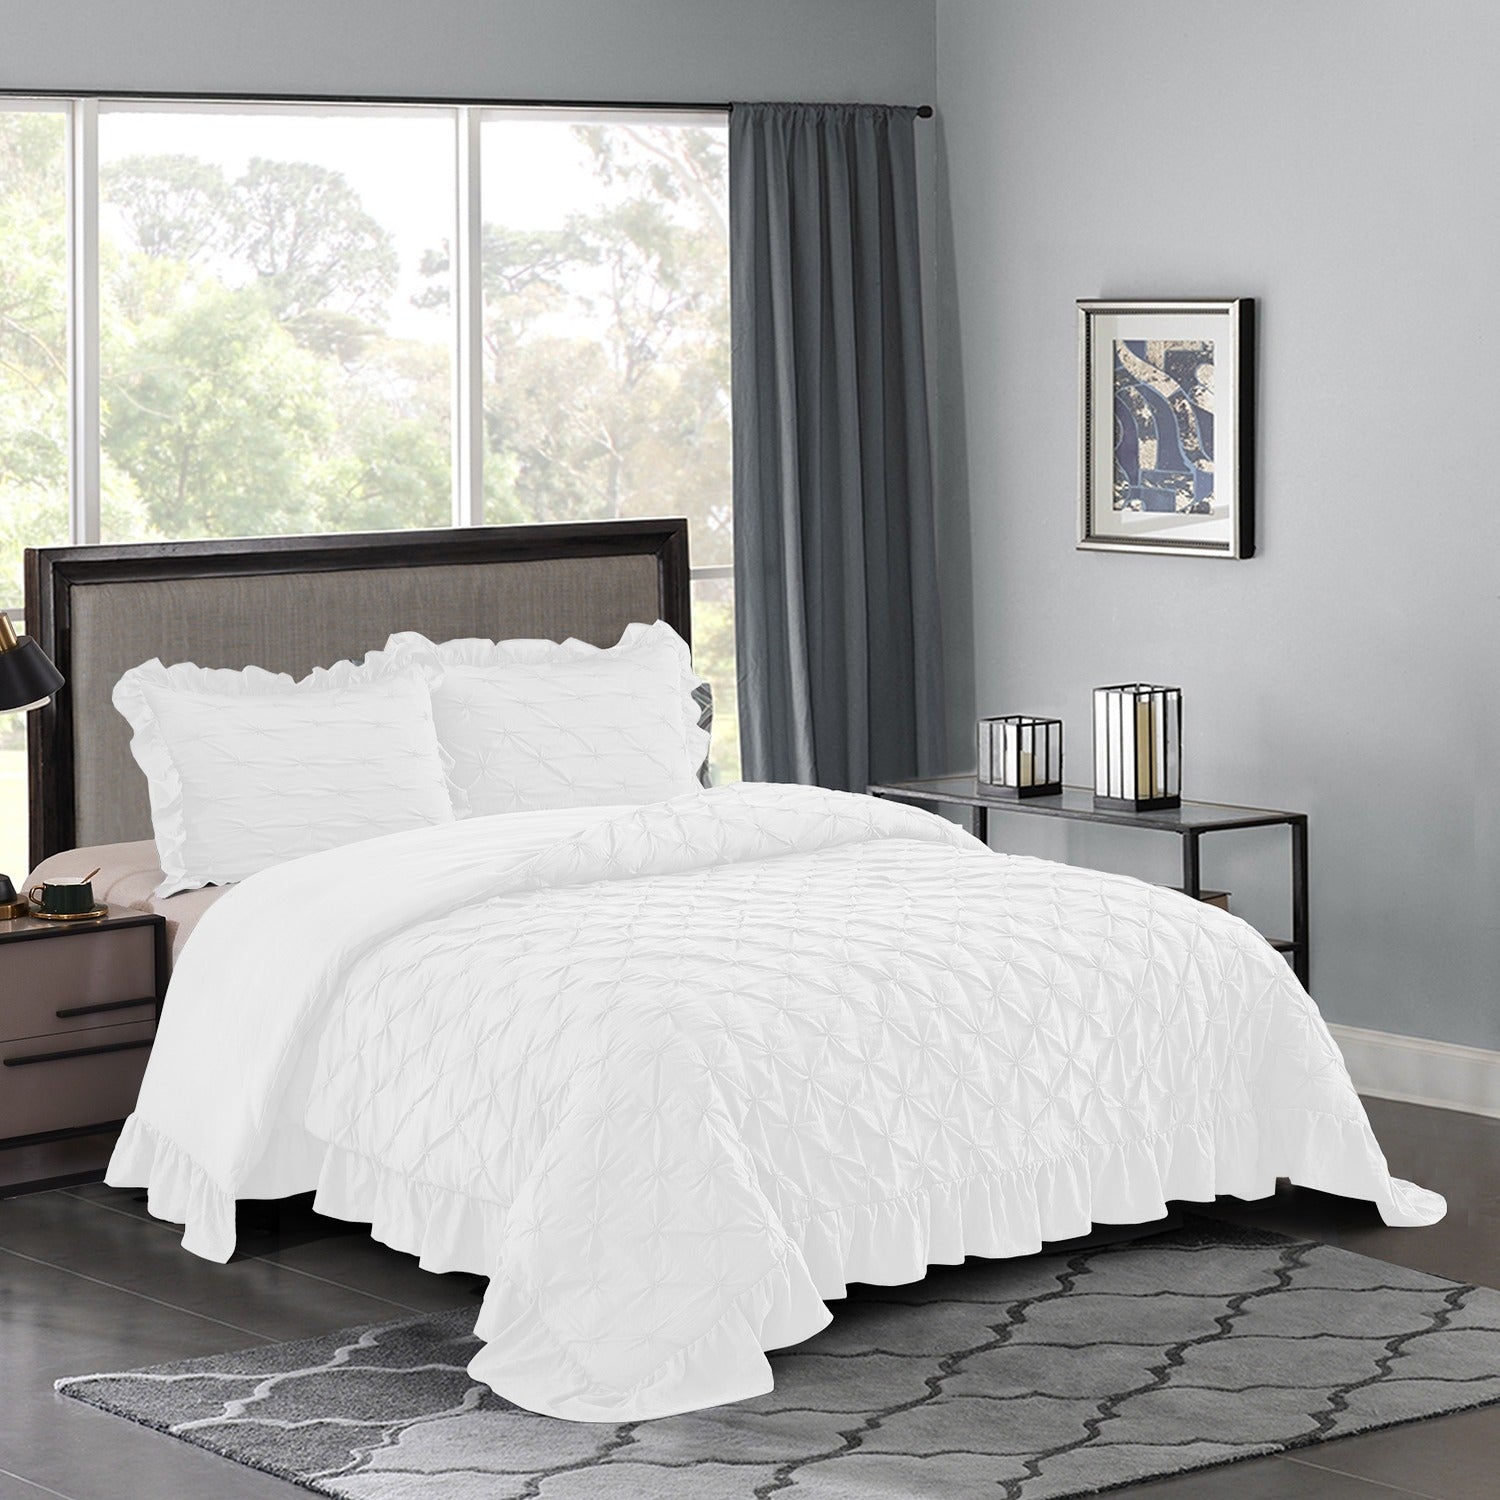 BRIANNA 3PC WHITE BEDDING COMFORTER SET. RUFFLE & PATCHWORK, MICROFIBER FABRIC, FADE RESISTANT, SUPER SOFT, BED IN A BAG